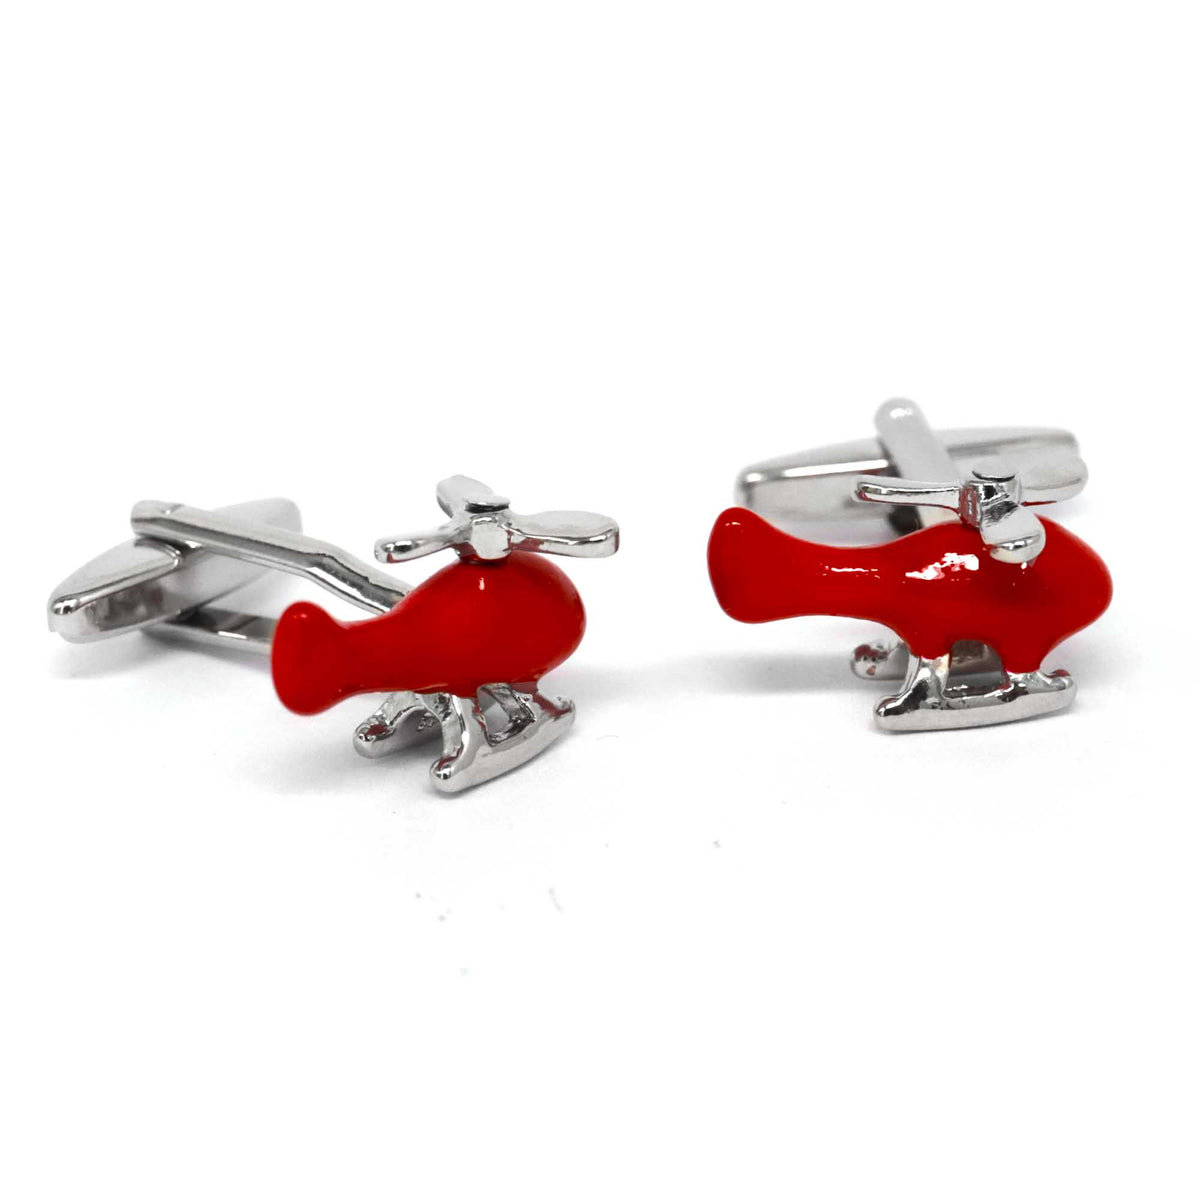 Helicopter Cufflinks in Red (Online Exclusive)